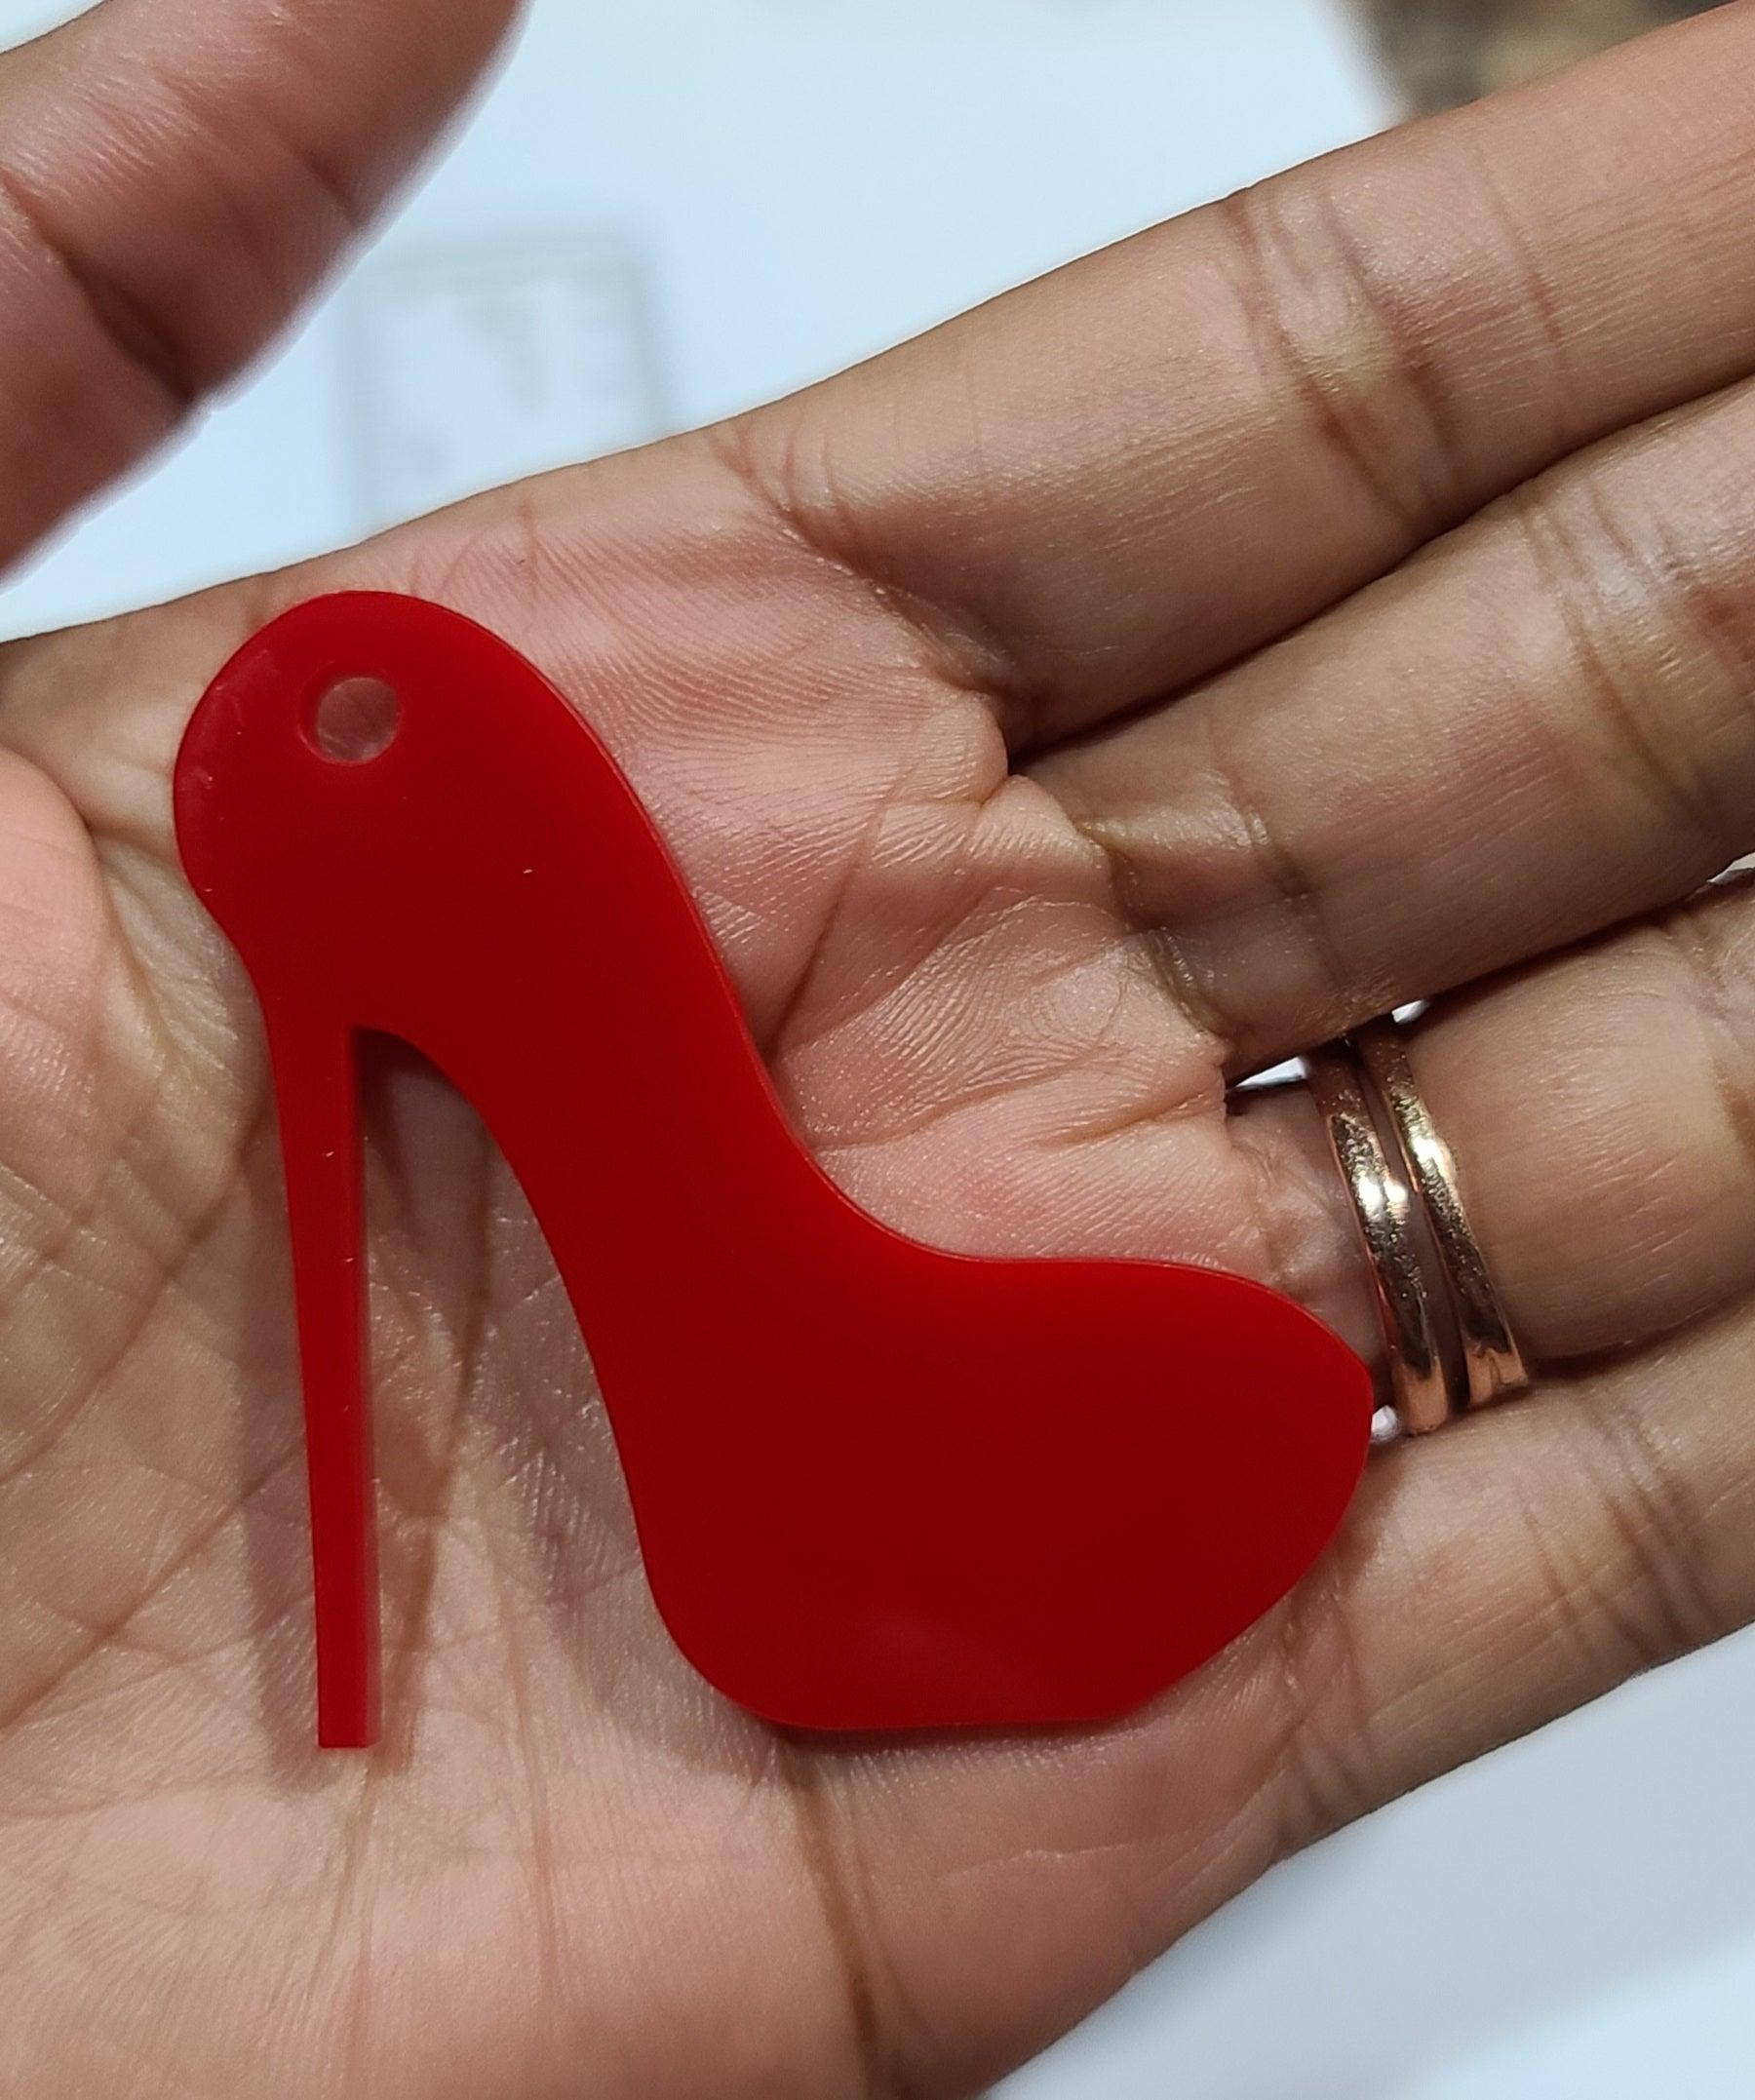 High Heel Silicone Mold - Resin Mold - Keychain Molds - Resin Silicone Mold - Epoxy Resin Mold - Jewelry Making - Shoes Mold - Heel Mold - Art By Suleny Craft Store LLC